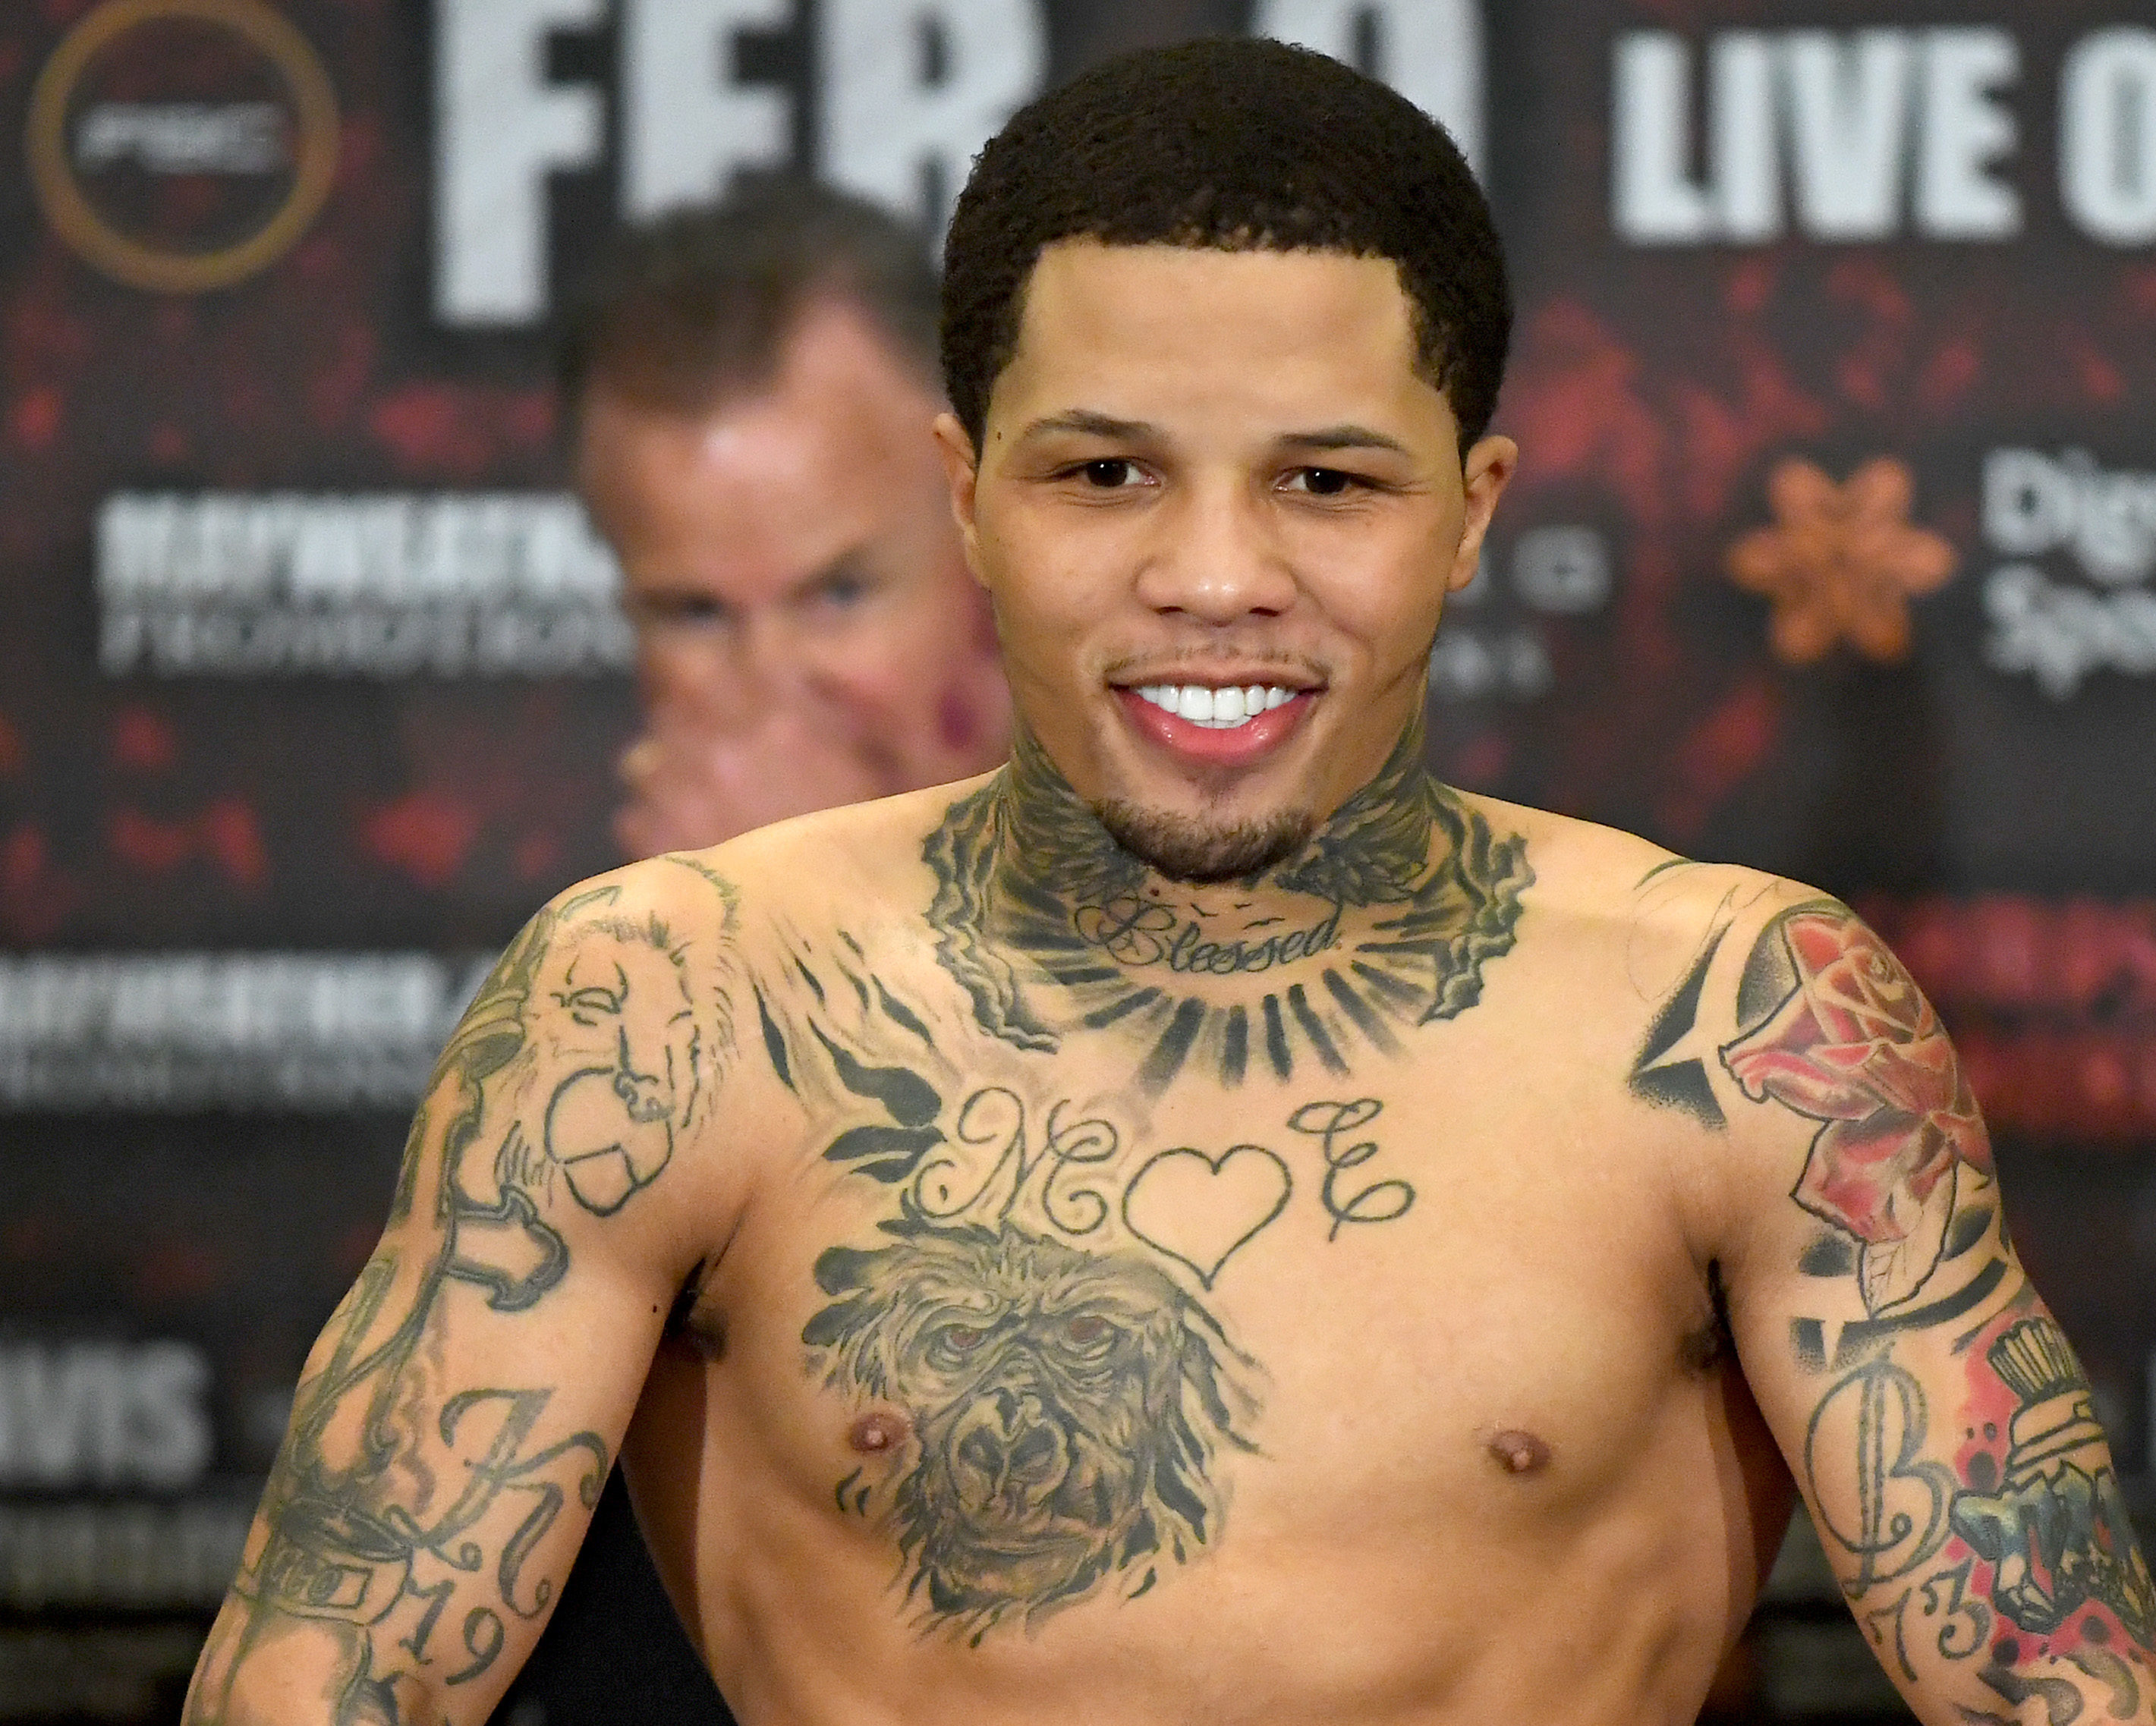 Boxer Gervonta Davis suggests that his Instagram account was hacked after the message "I can't stop cheatin on my girl" was posted to his Instagram story.